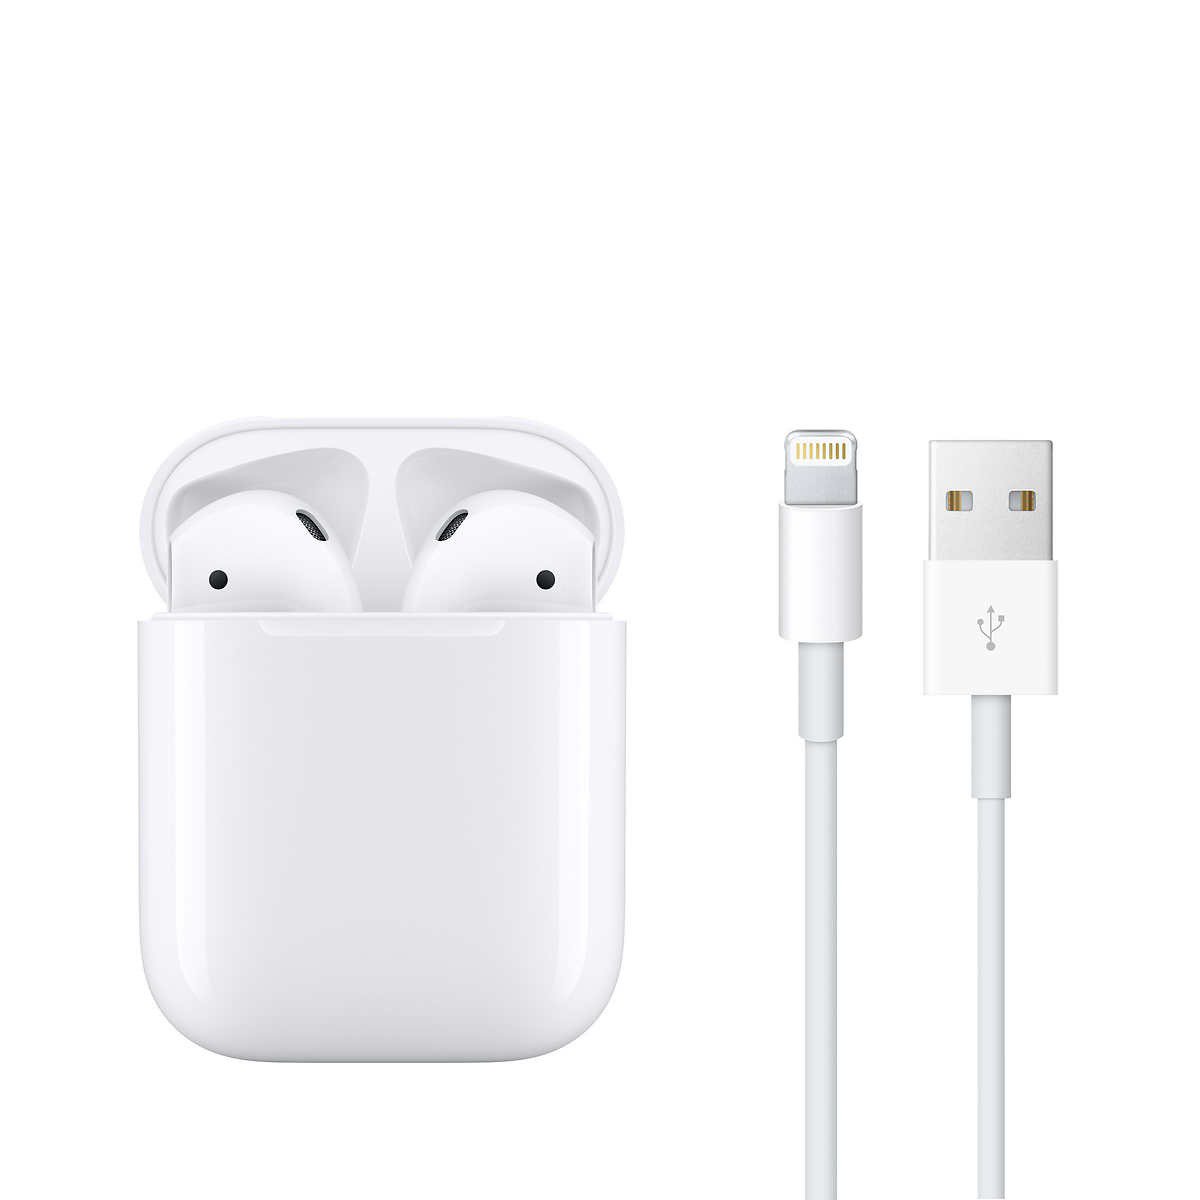 Apple AirPods 2 Wireless Headphones with Charging Case